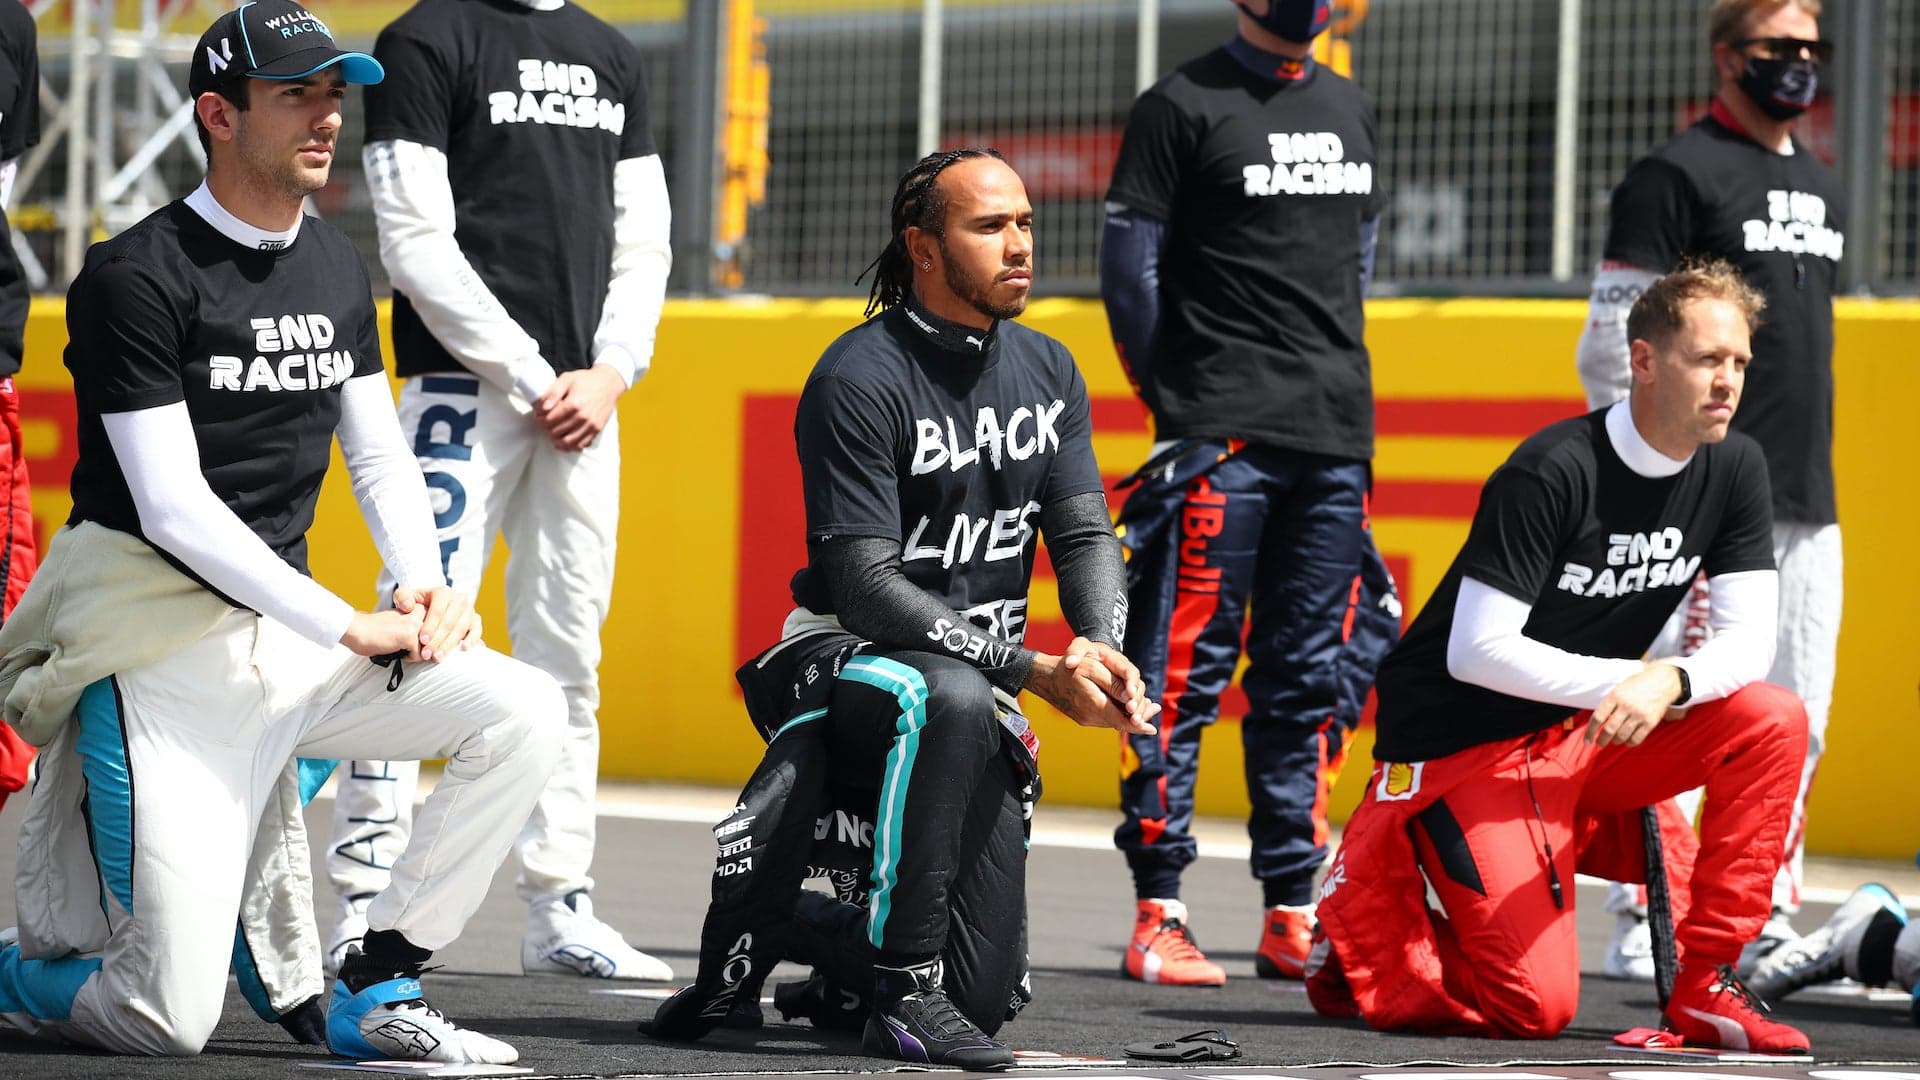 Lewis Hamilton Named One of TIME‘s 100 Most Influential People of 2020